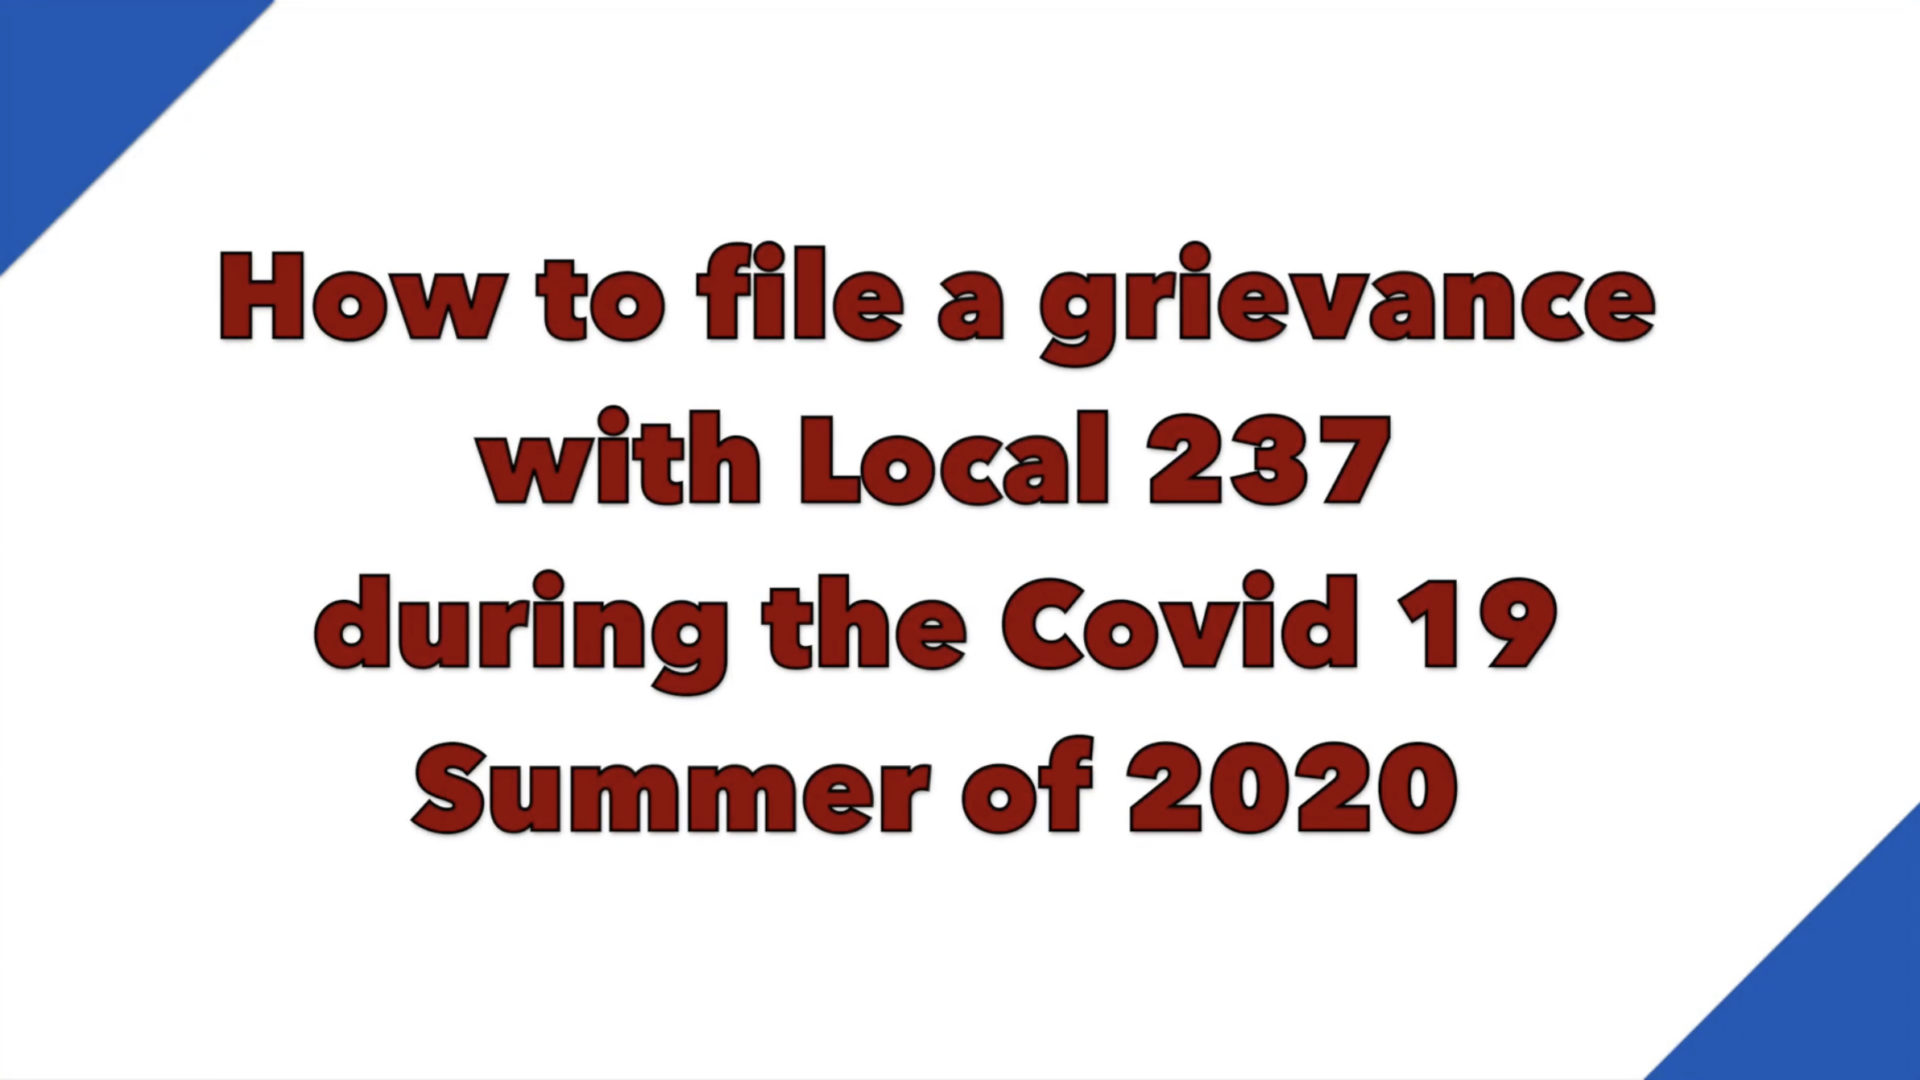 Grievance Filing Procedure for Local 237 School Safety Agents